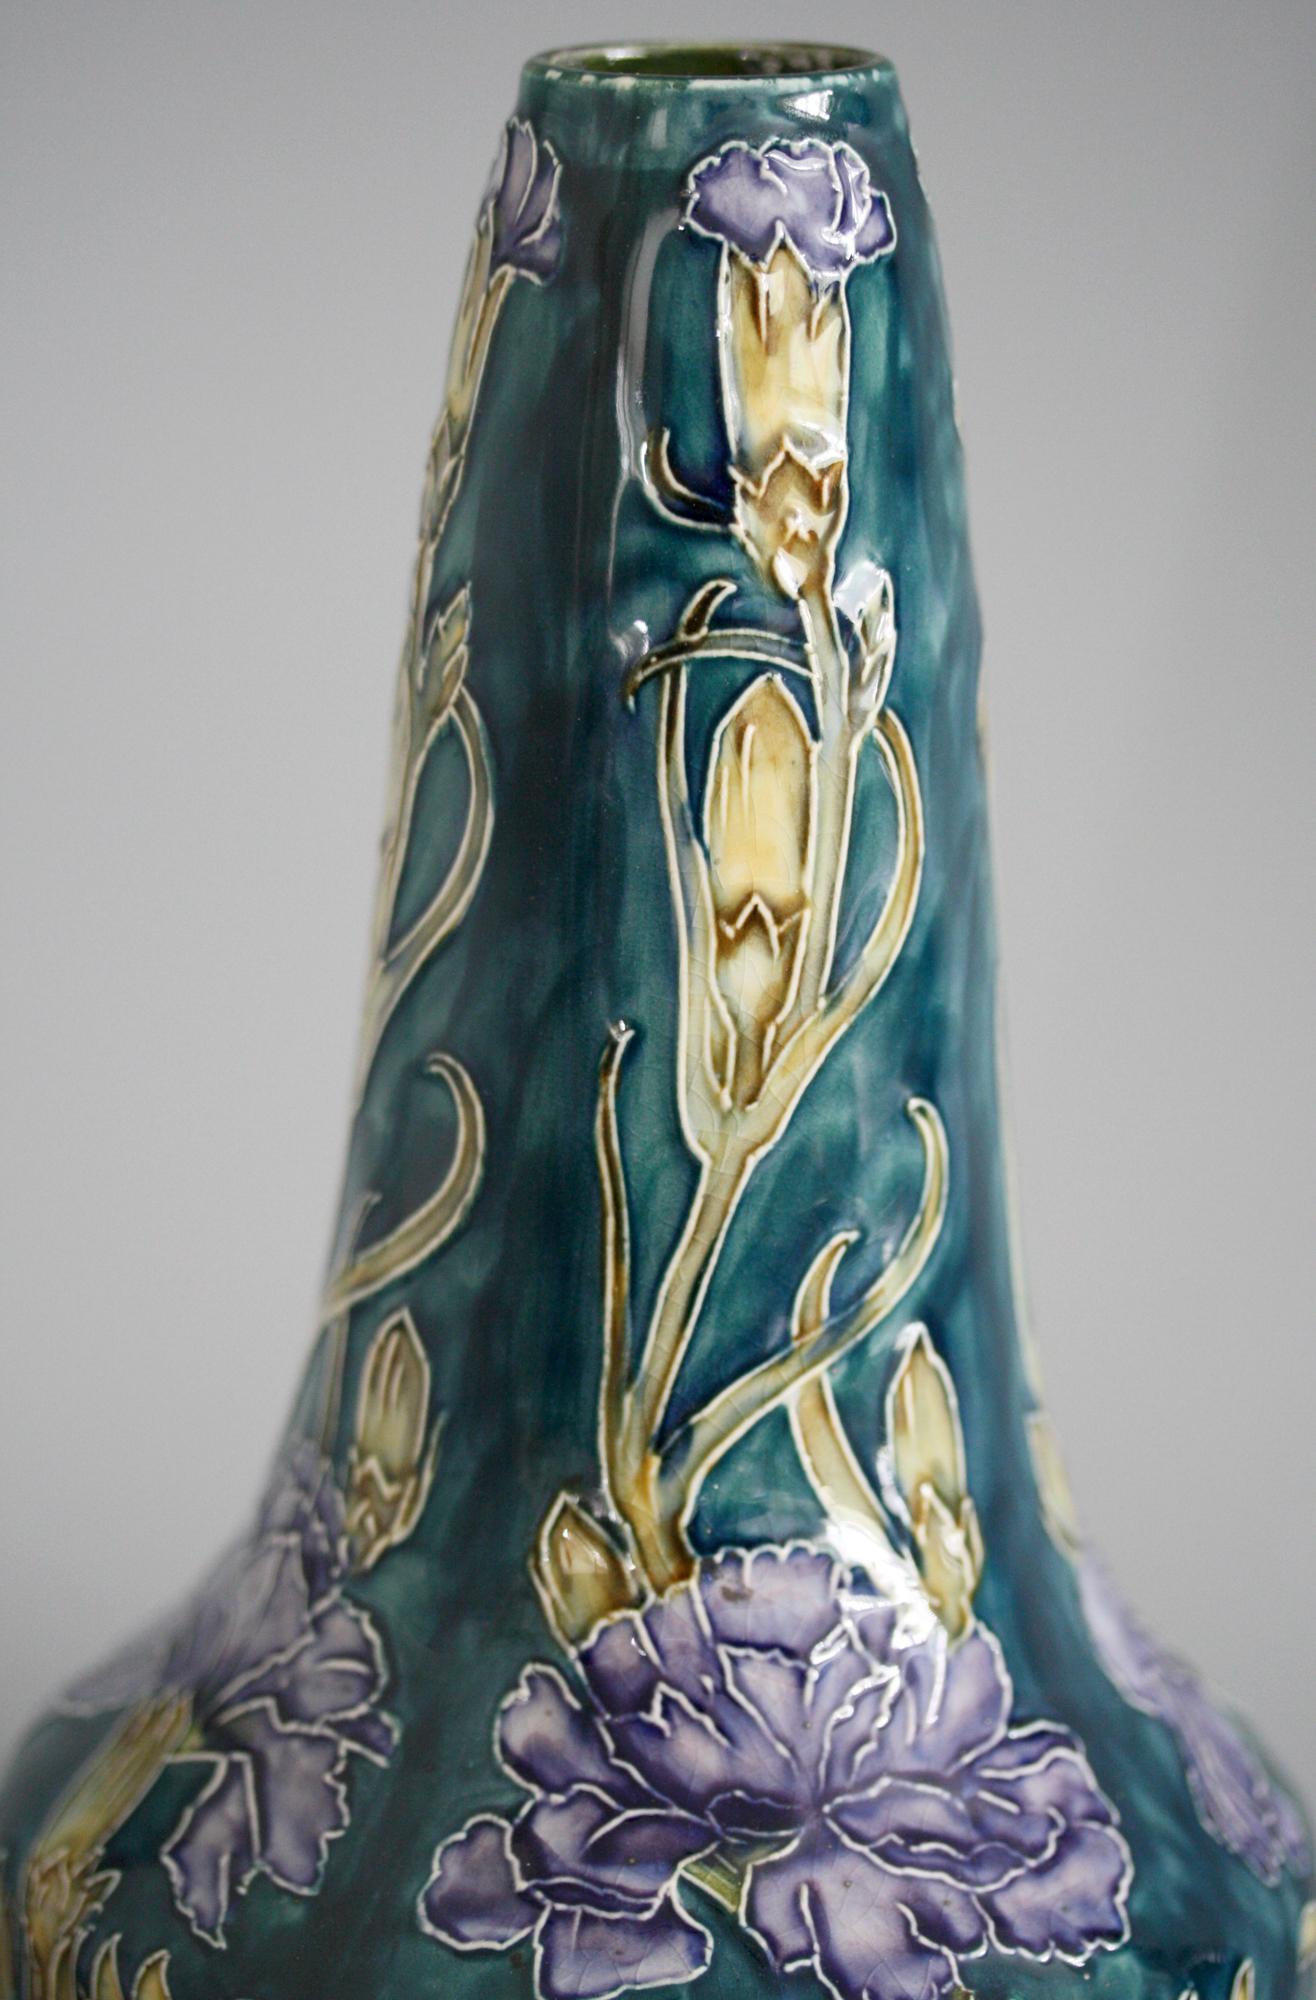 A stunning and scarce iconic early Art Deco Hancock & Sons Morrisware hand painted art pottery vase with flowering carnations by George Cartlidge dating between 1918 and 1926. This stylish flask shaped vase stands on a narrow rounded base with a